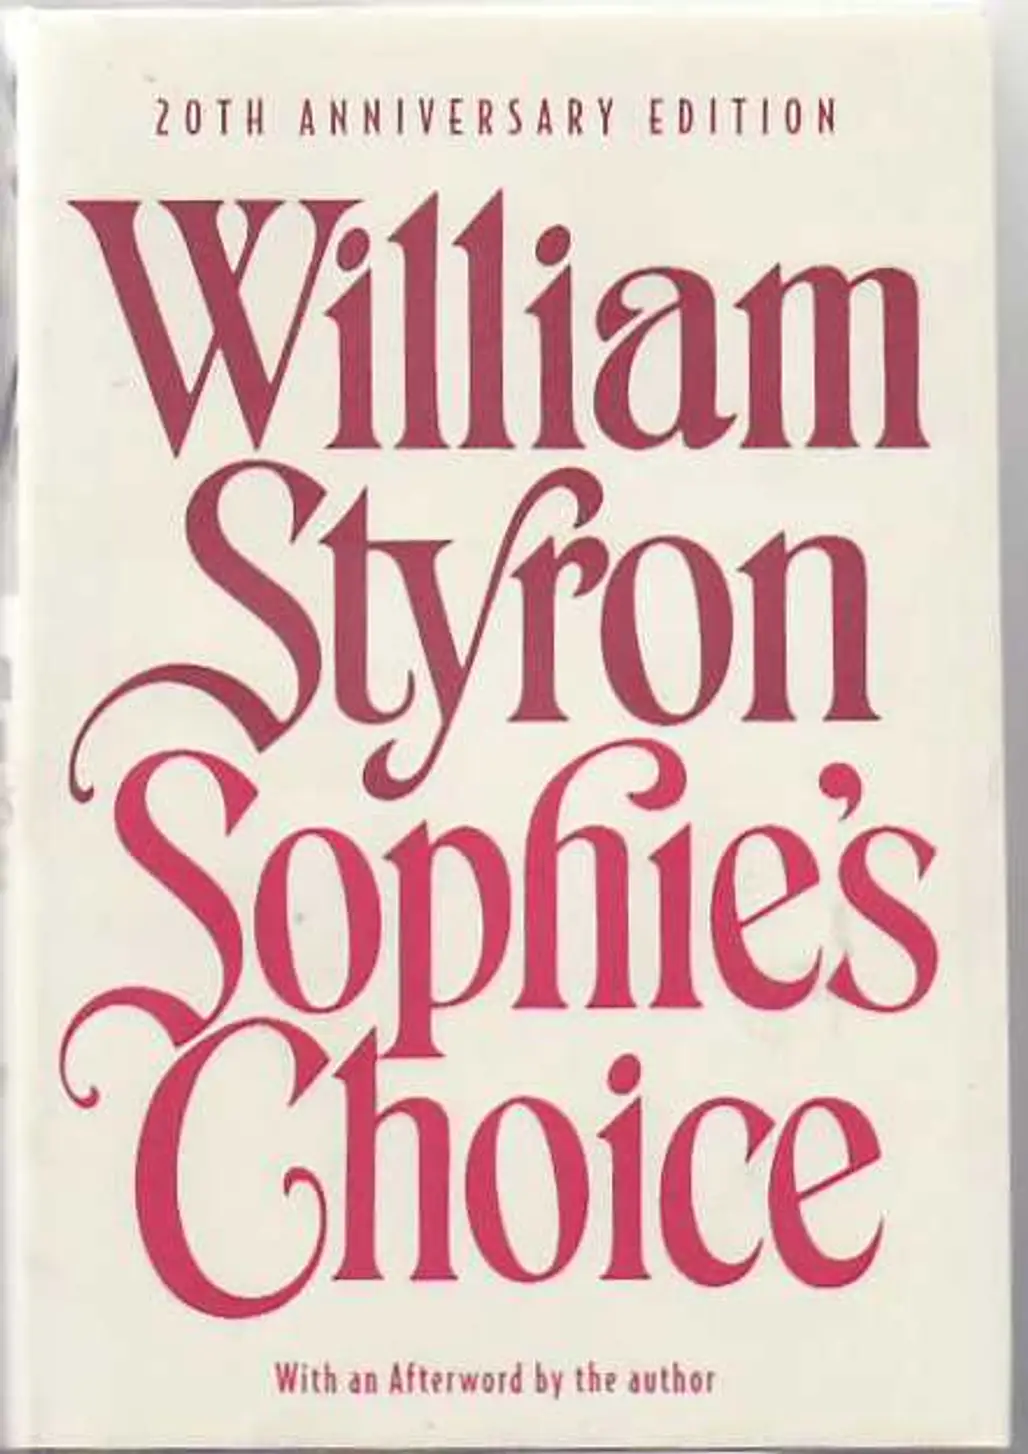 Sophie’s Choice by William Styron